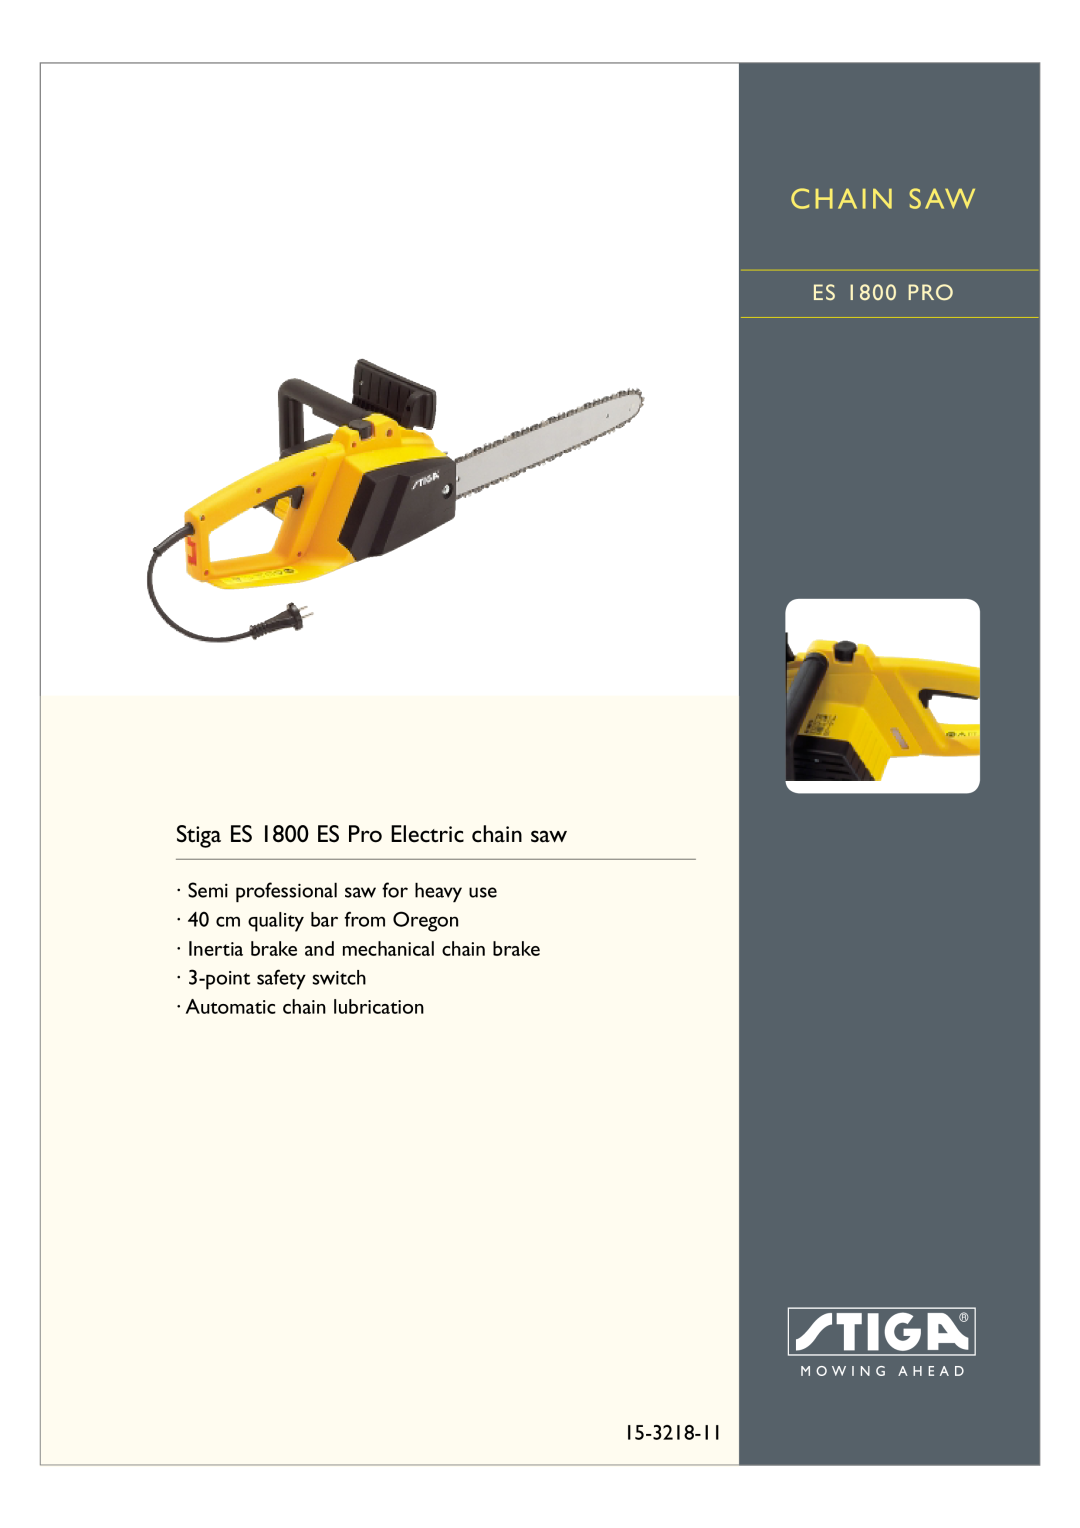 Stiga ES 1800 PRO manual C H A I N S Aw, Stiga ES 1800 ES Pro Electric chain saw, ·Semi professional saw for heavy use 